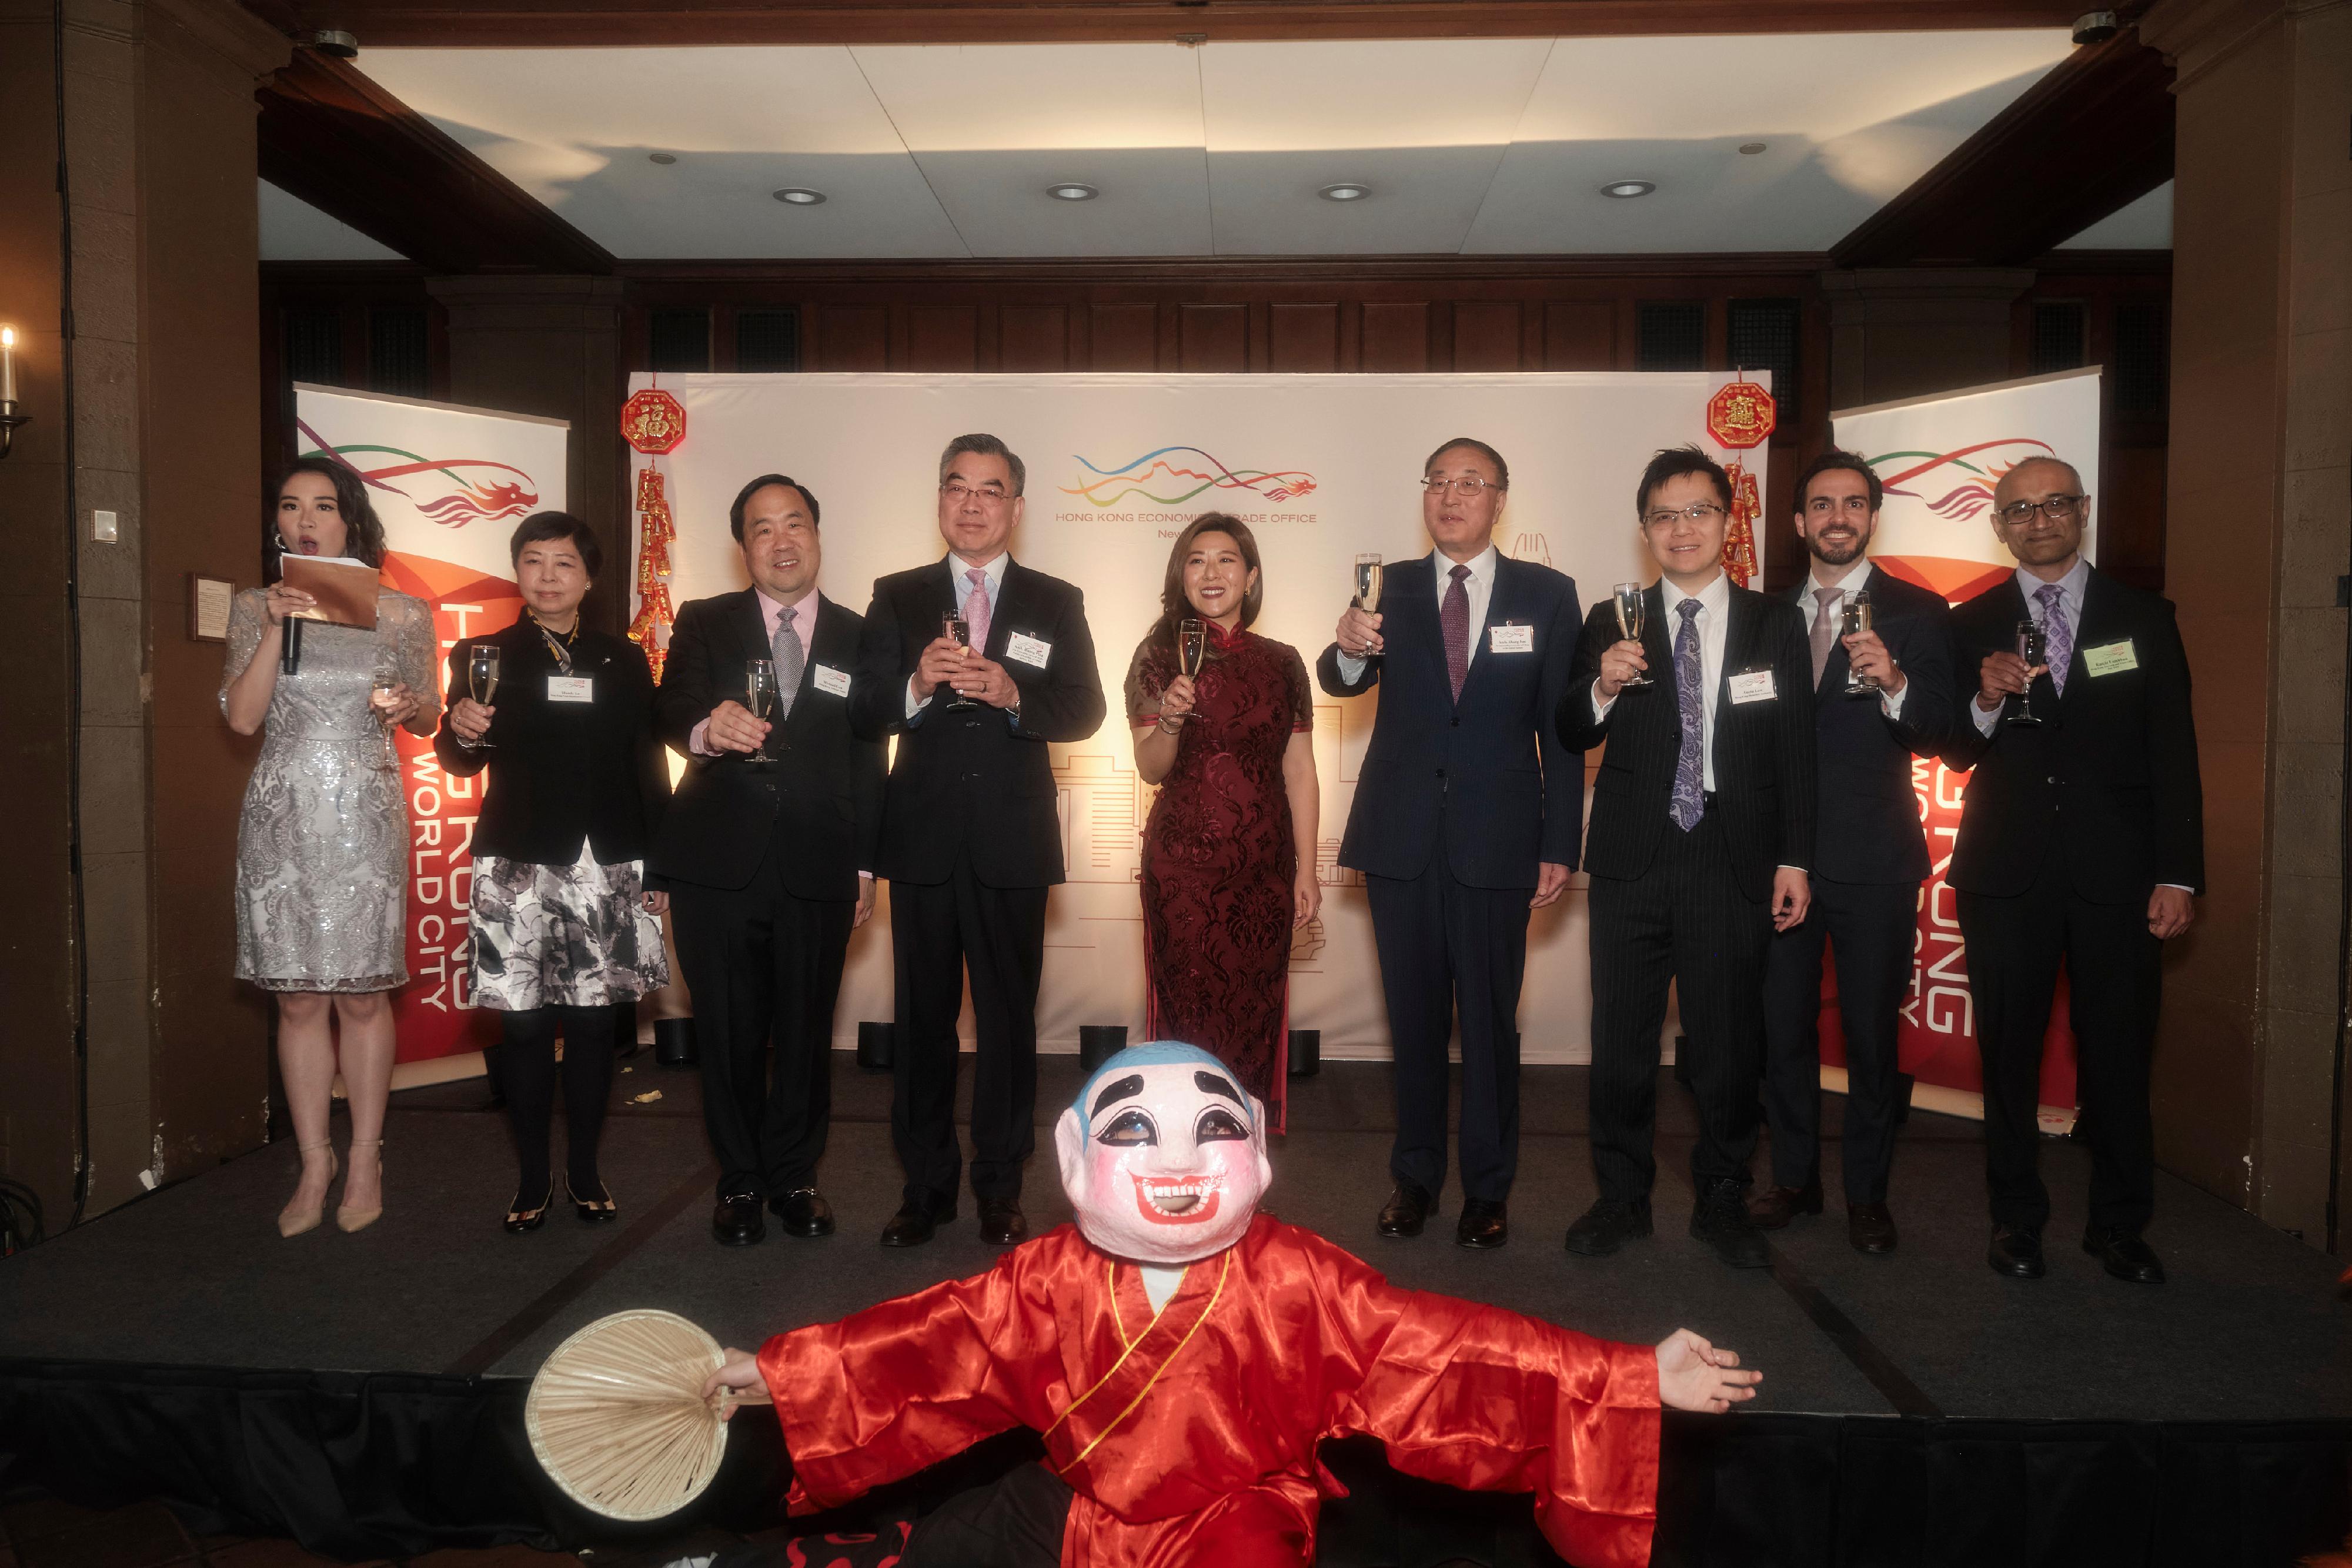 The Hong Kong Economic and Trade Office in New York (HKETONY) hosted its spring reception in New York on February 15 (New York time) to celebrate the Year of the Dragon. Photo shows the Director of HKETONY, Ms Maisie Ho (centre); the Permanent Representative of the People’s Republic of China (PRC) to the United Nations, Mr Zhang Jun (fourth right); the Consul-General of the PRC in New York, Mr Huang Ping (fourth left); the Chief Representative of the Hong Kong Monetary Authority in New York, Mr Anson Law (third right); the Director for Americas of the Hong Kong Tourism Board, Mr Michael Lim (third left), and other officiating guests proposing a toast.